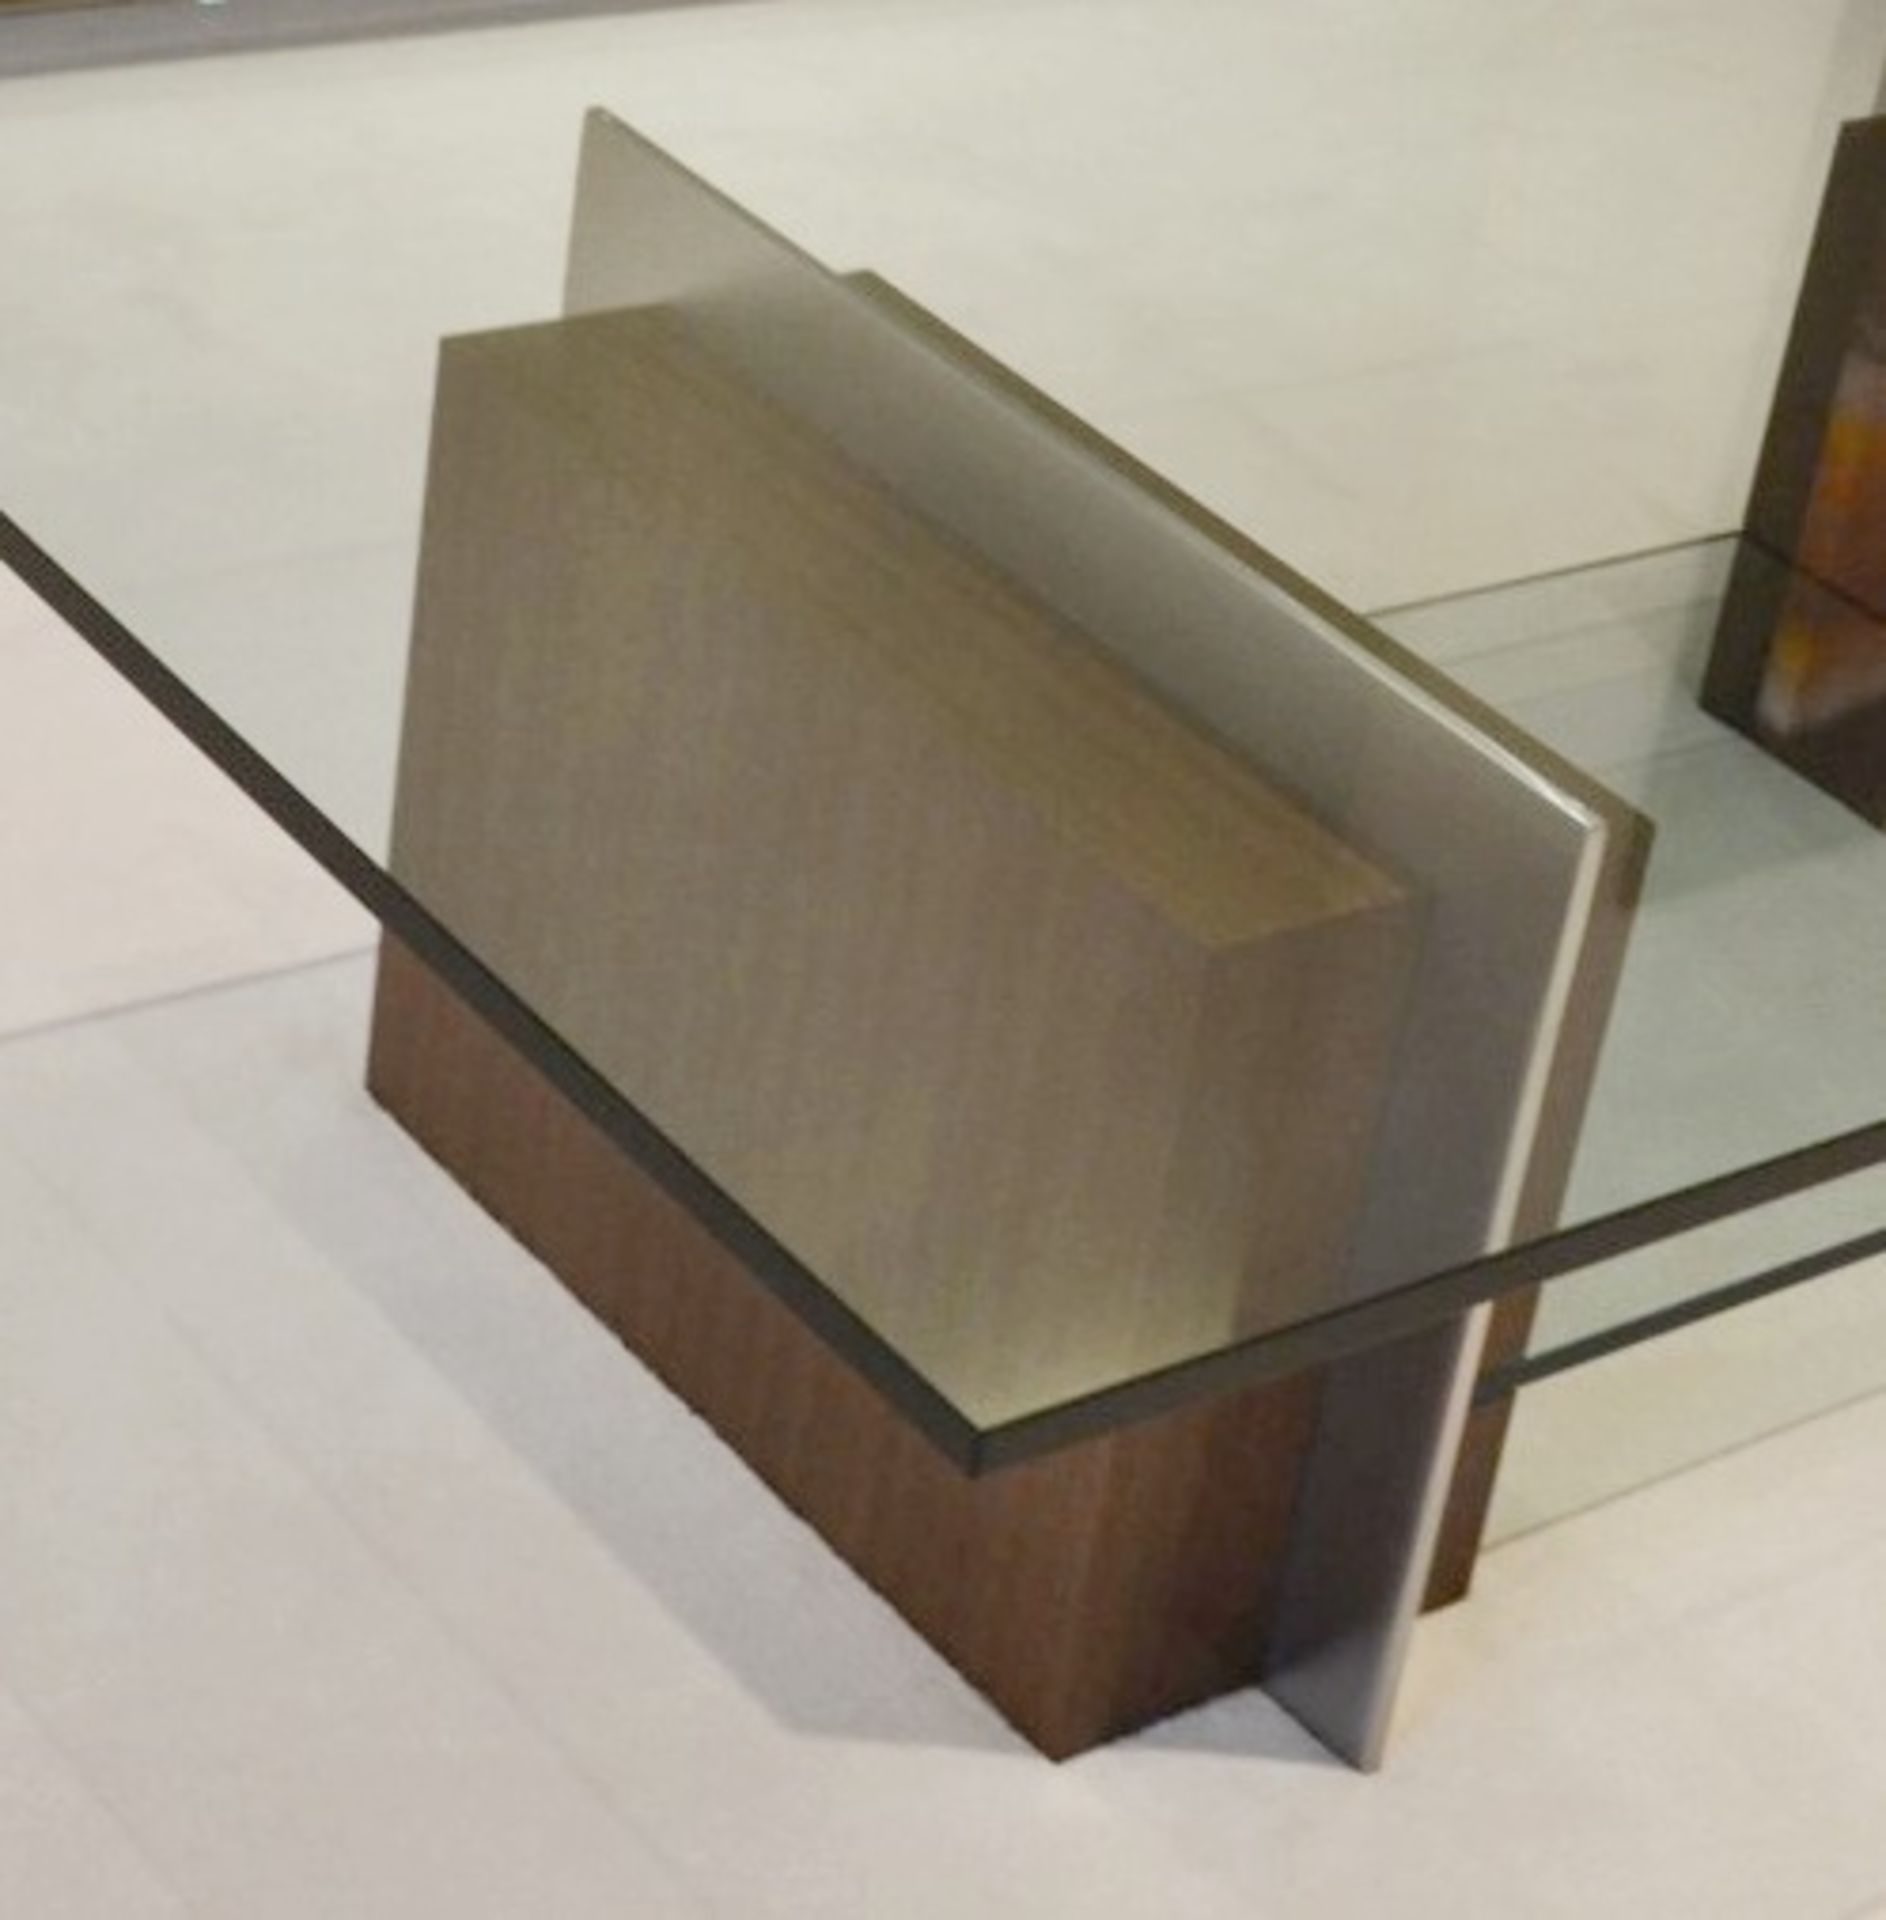 1 x Modern Large Glass Coffee Table With Glass Shelf And Stylish Square Bases - NO VAT ON HAMMER - Image 3 of 3